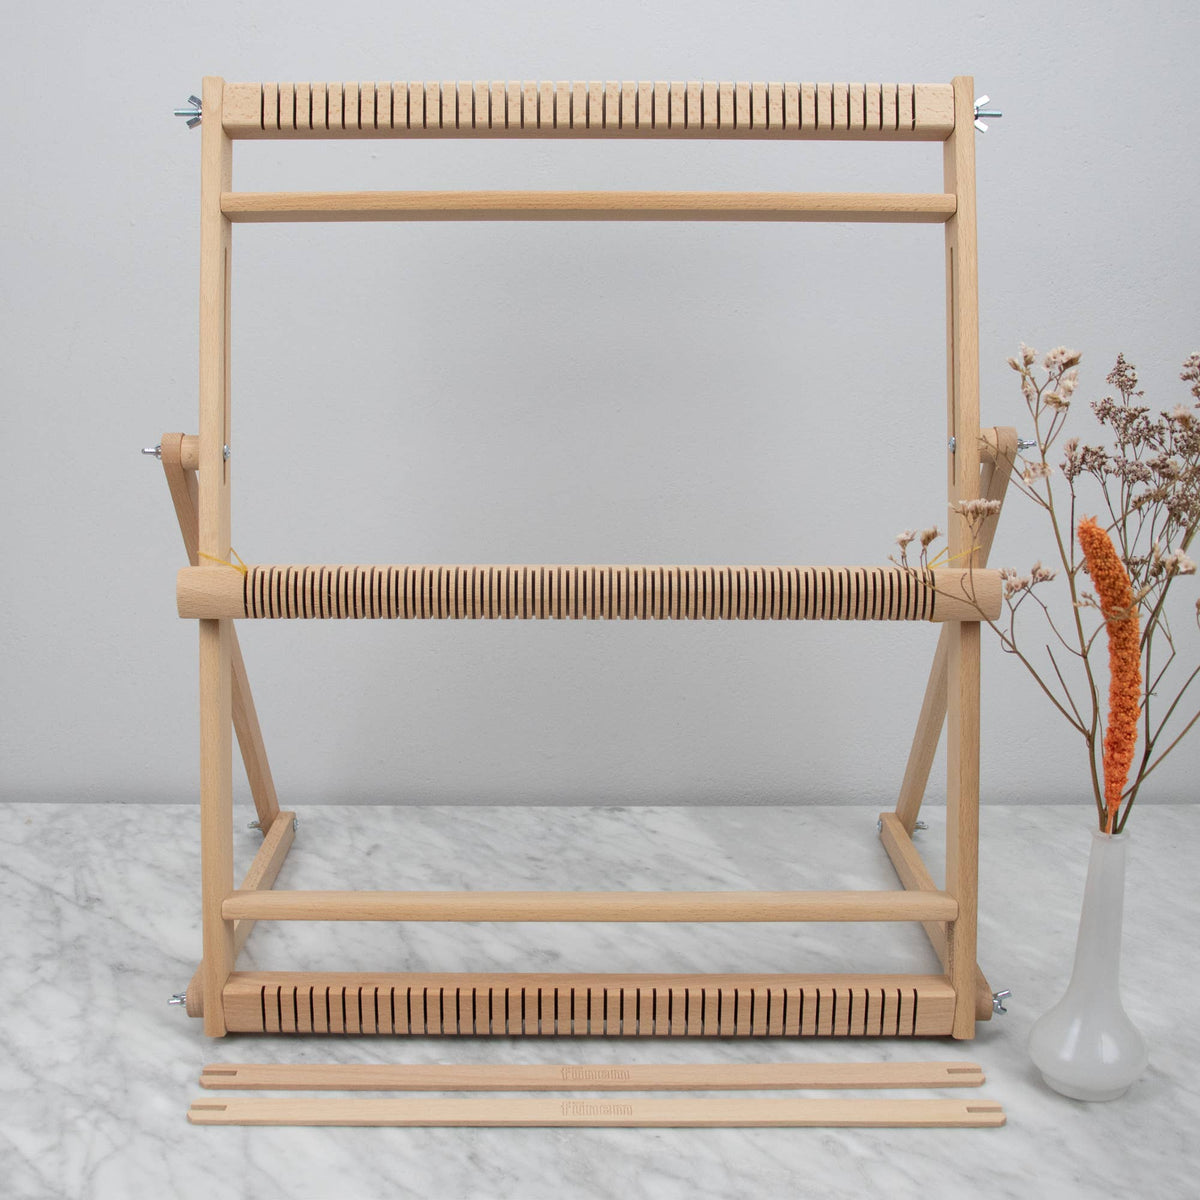 fūnem studio - Weaving Loom - Large (with stand)